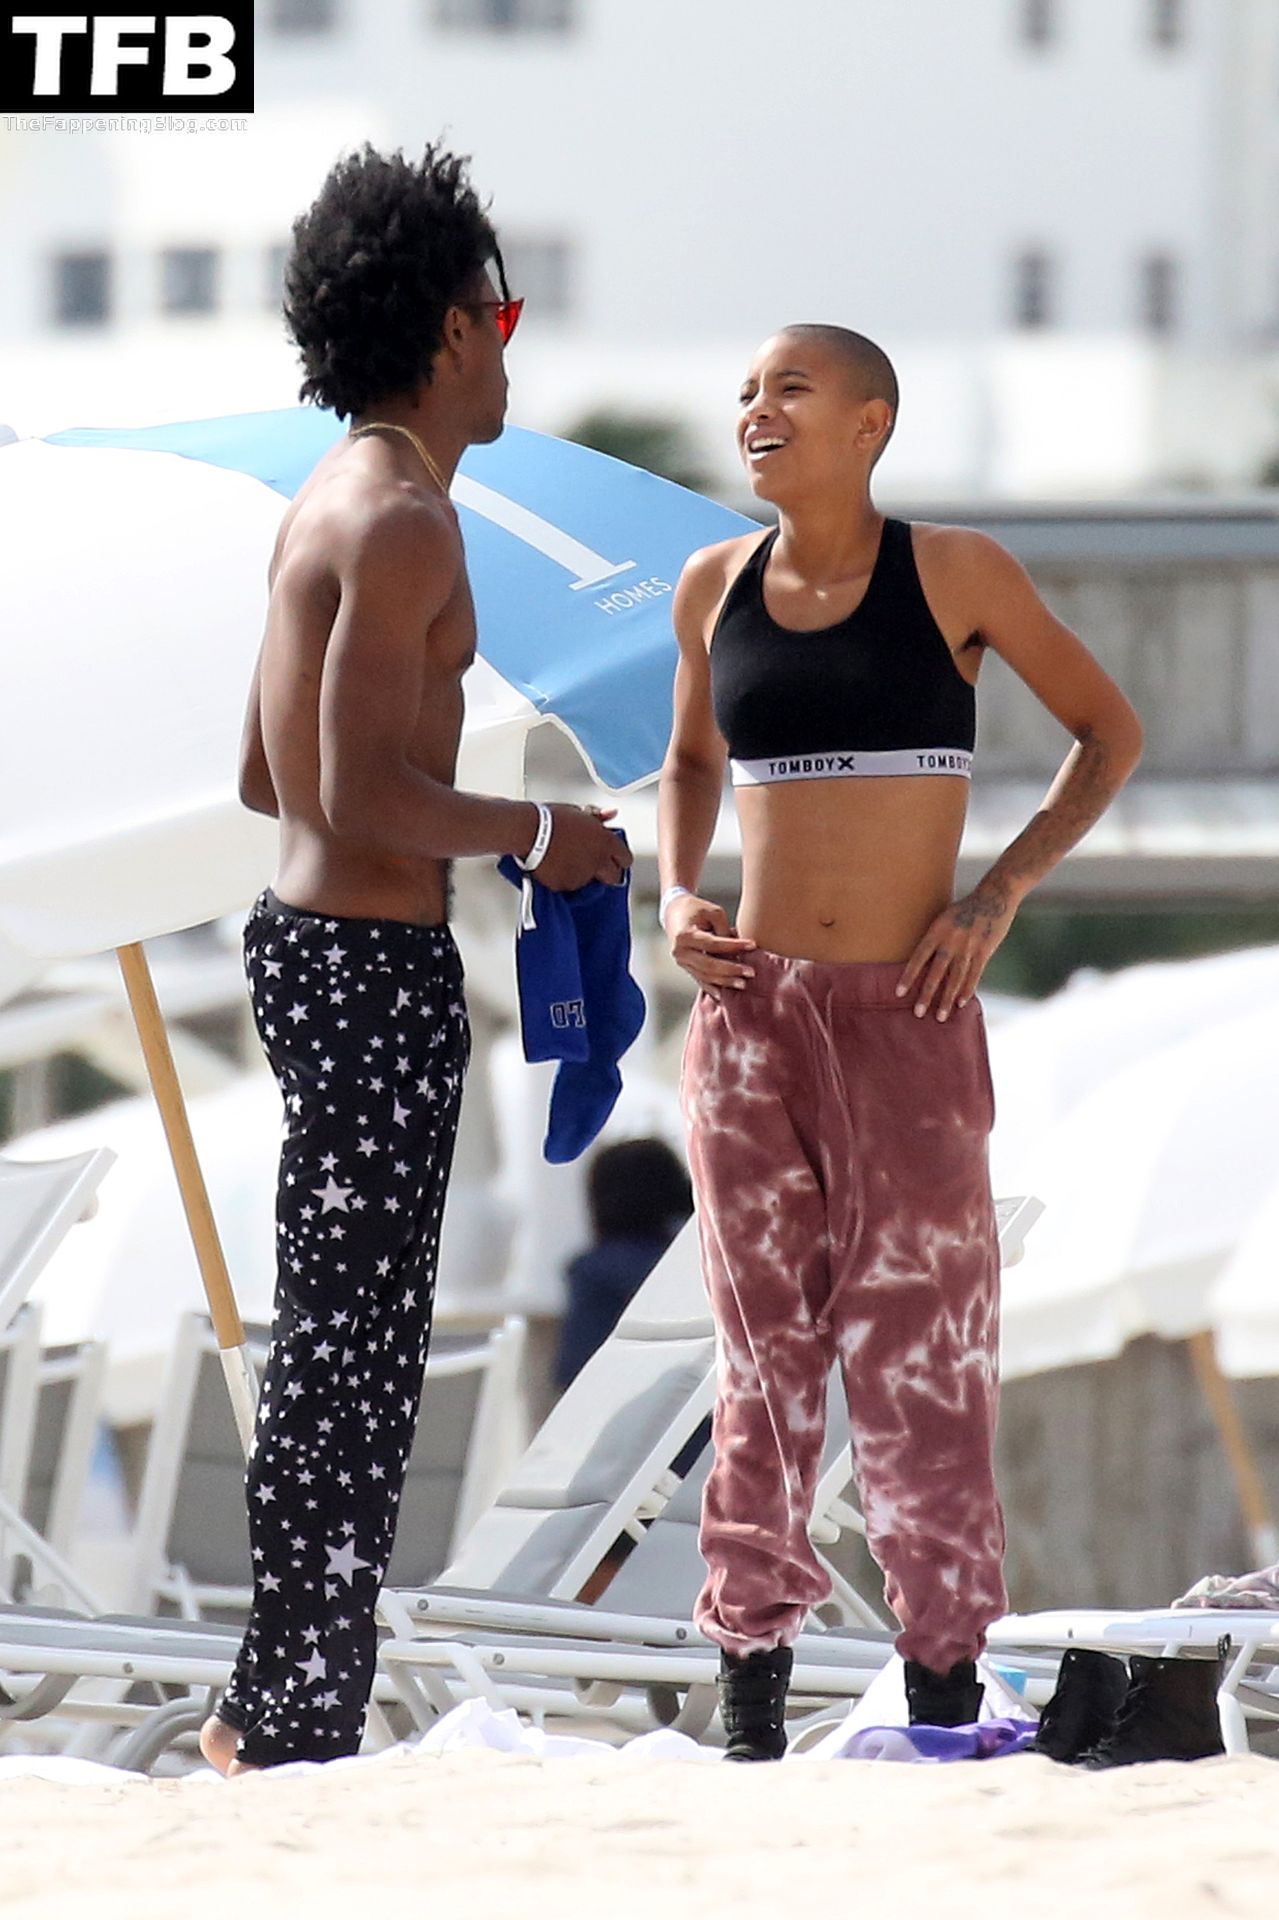 Willow-Smith-Sexy-tits-The-Fappening-Blog-2.jpg